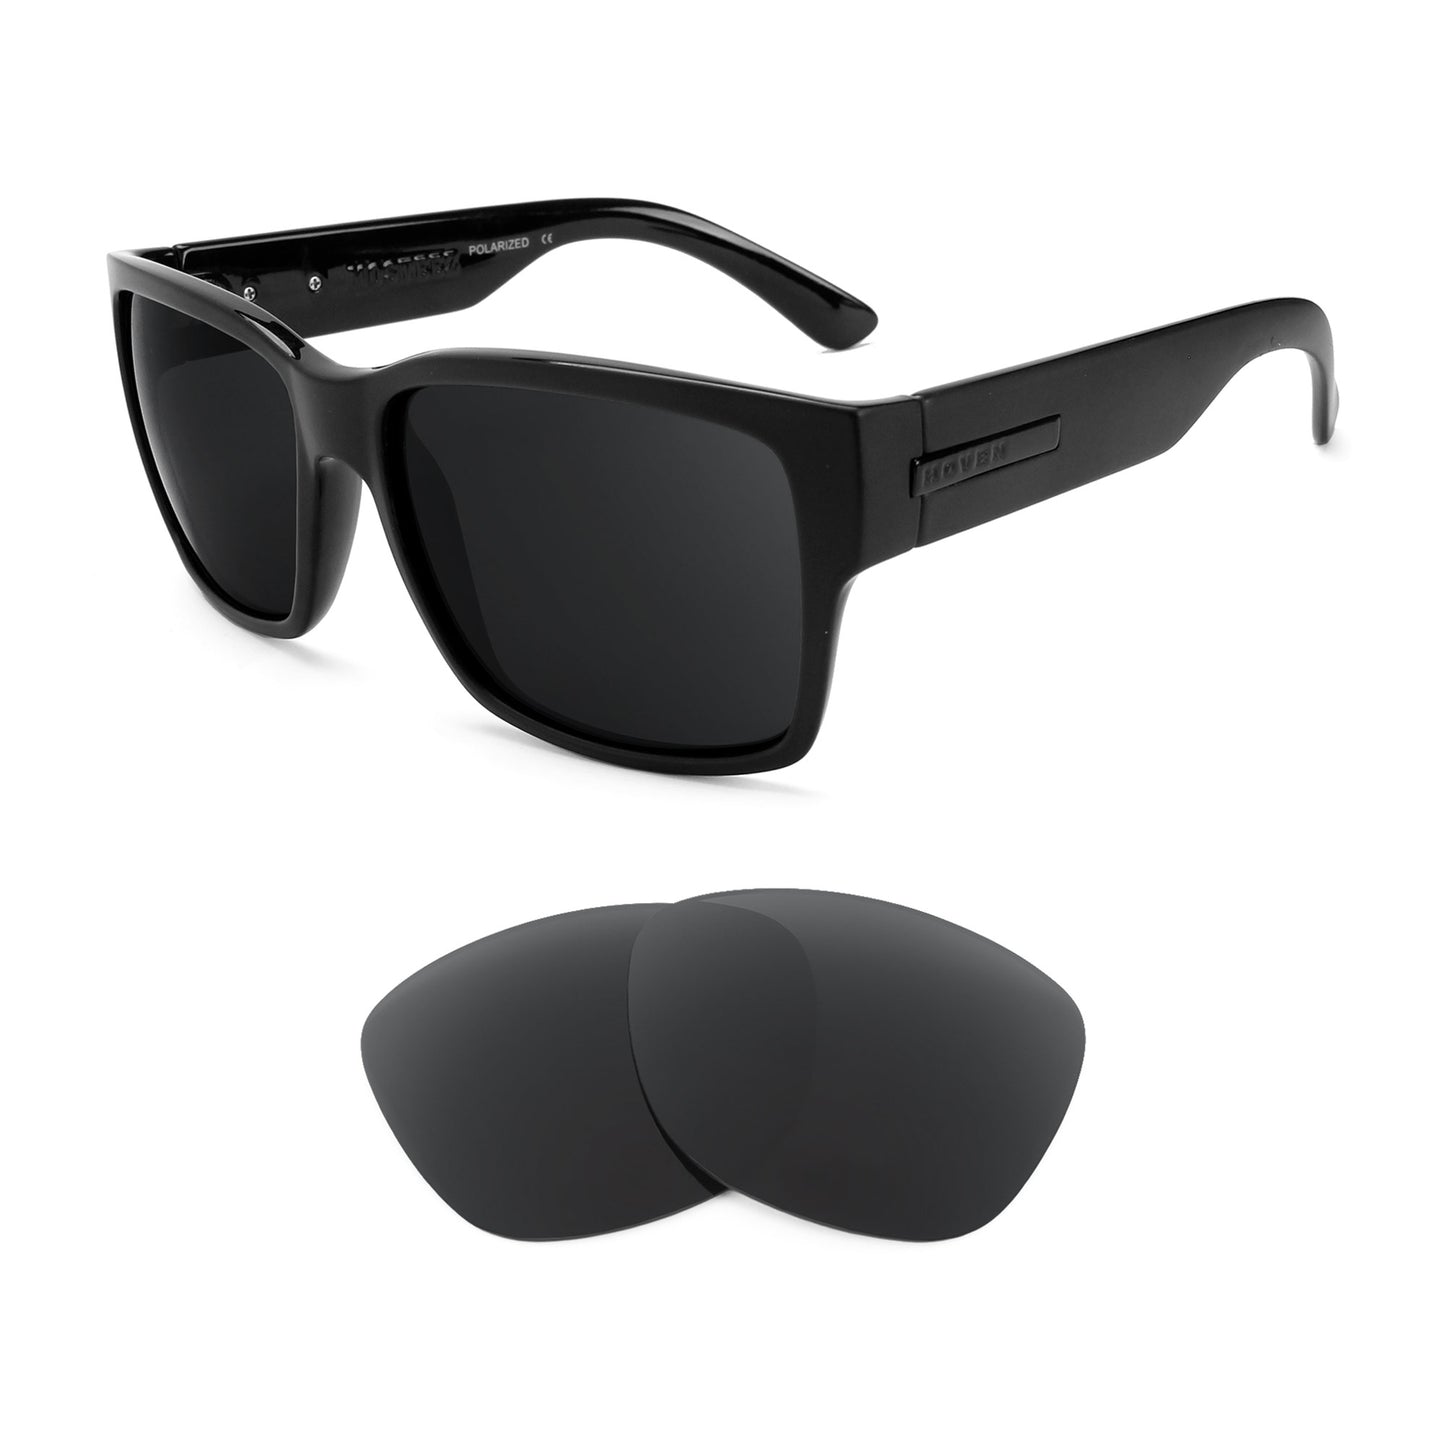 Hoven Mosteez sunglasses with replacement lenses